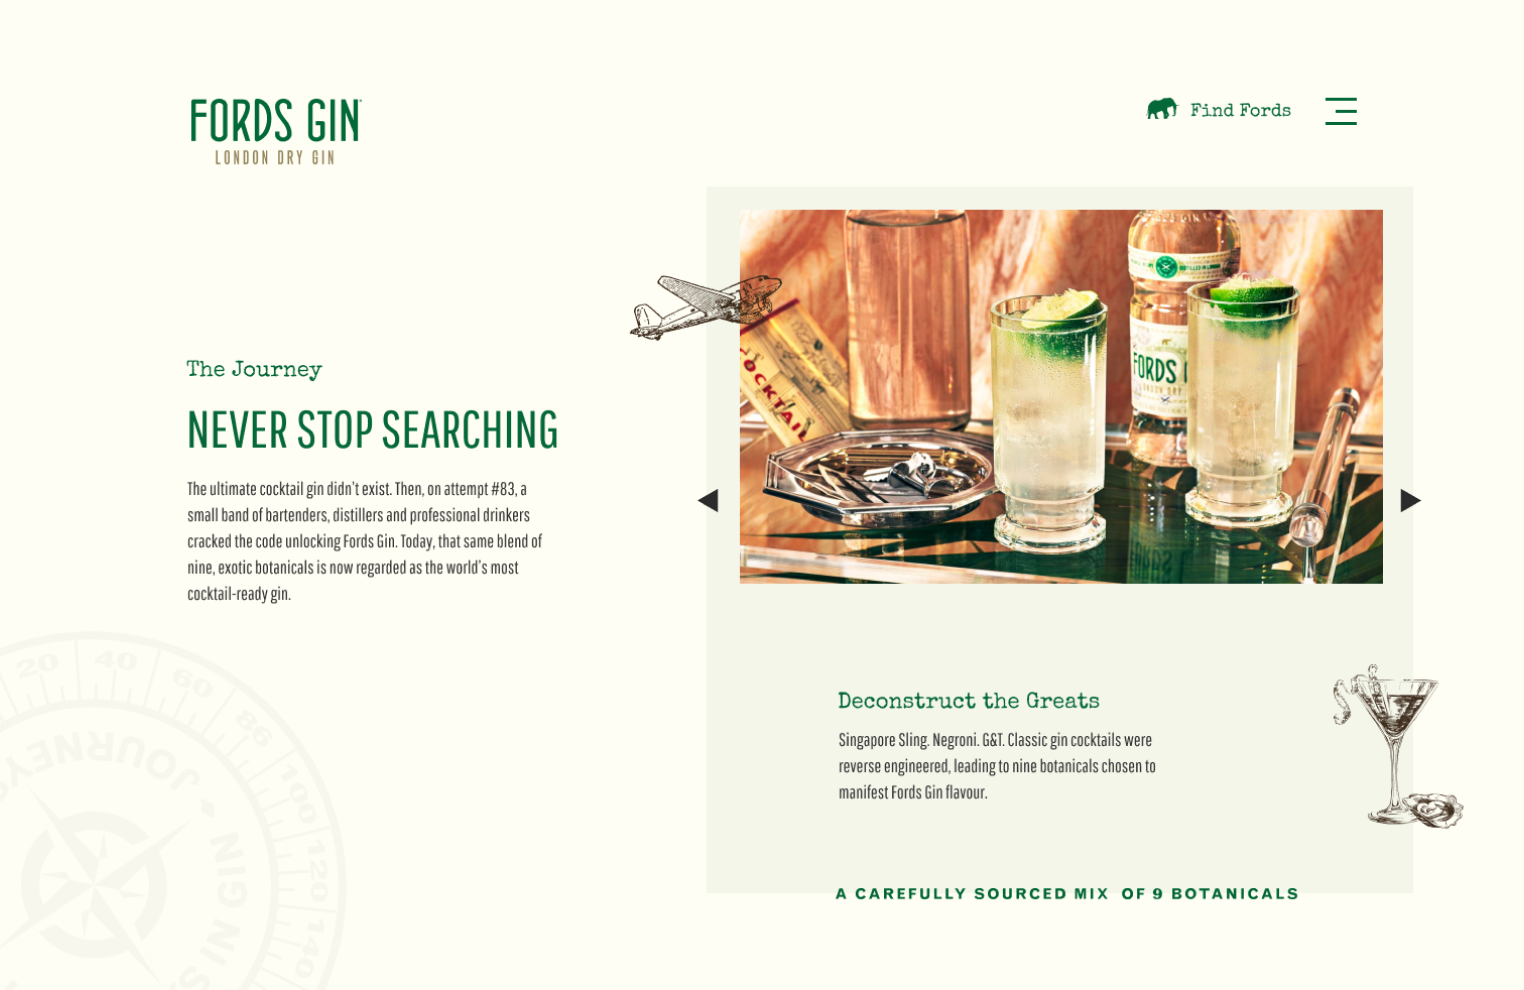 Fords Gin web design featuring a "Journey" section highlighting the history of Fords Gin.